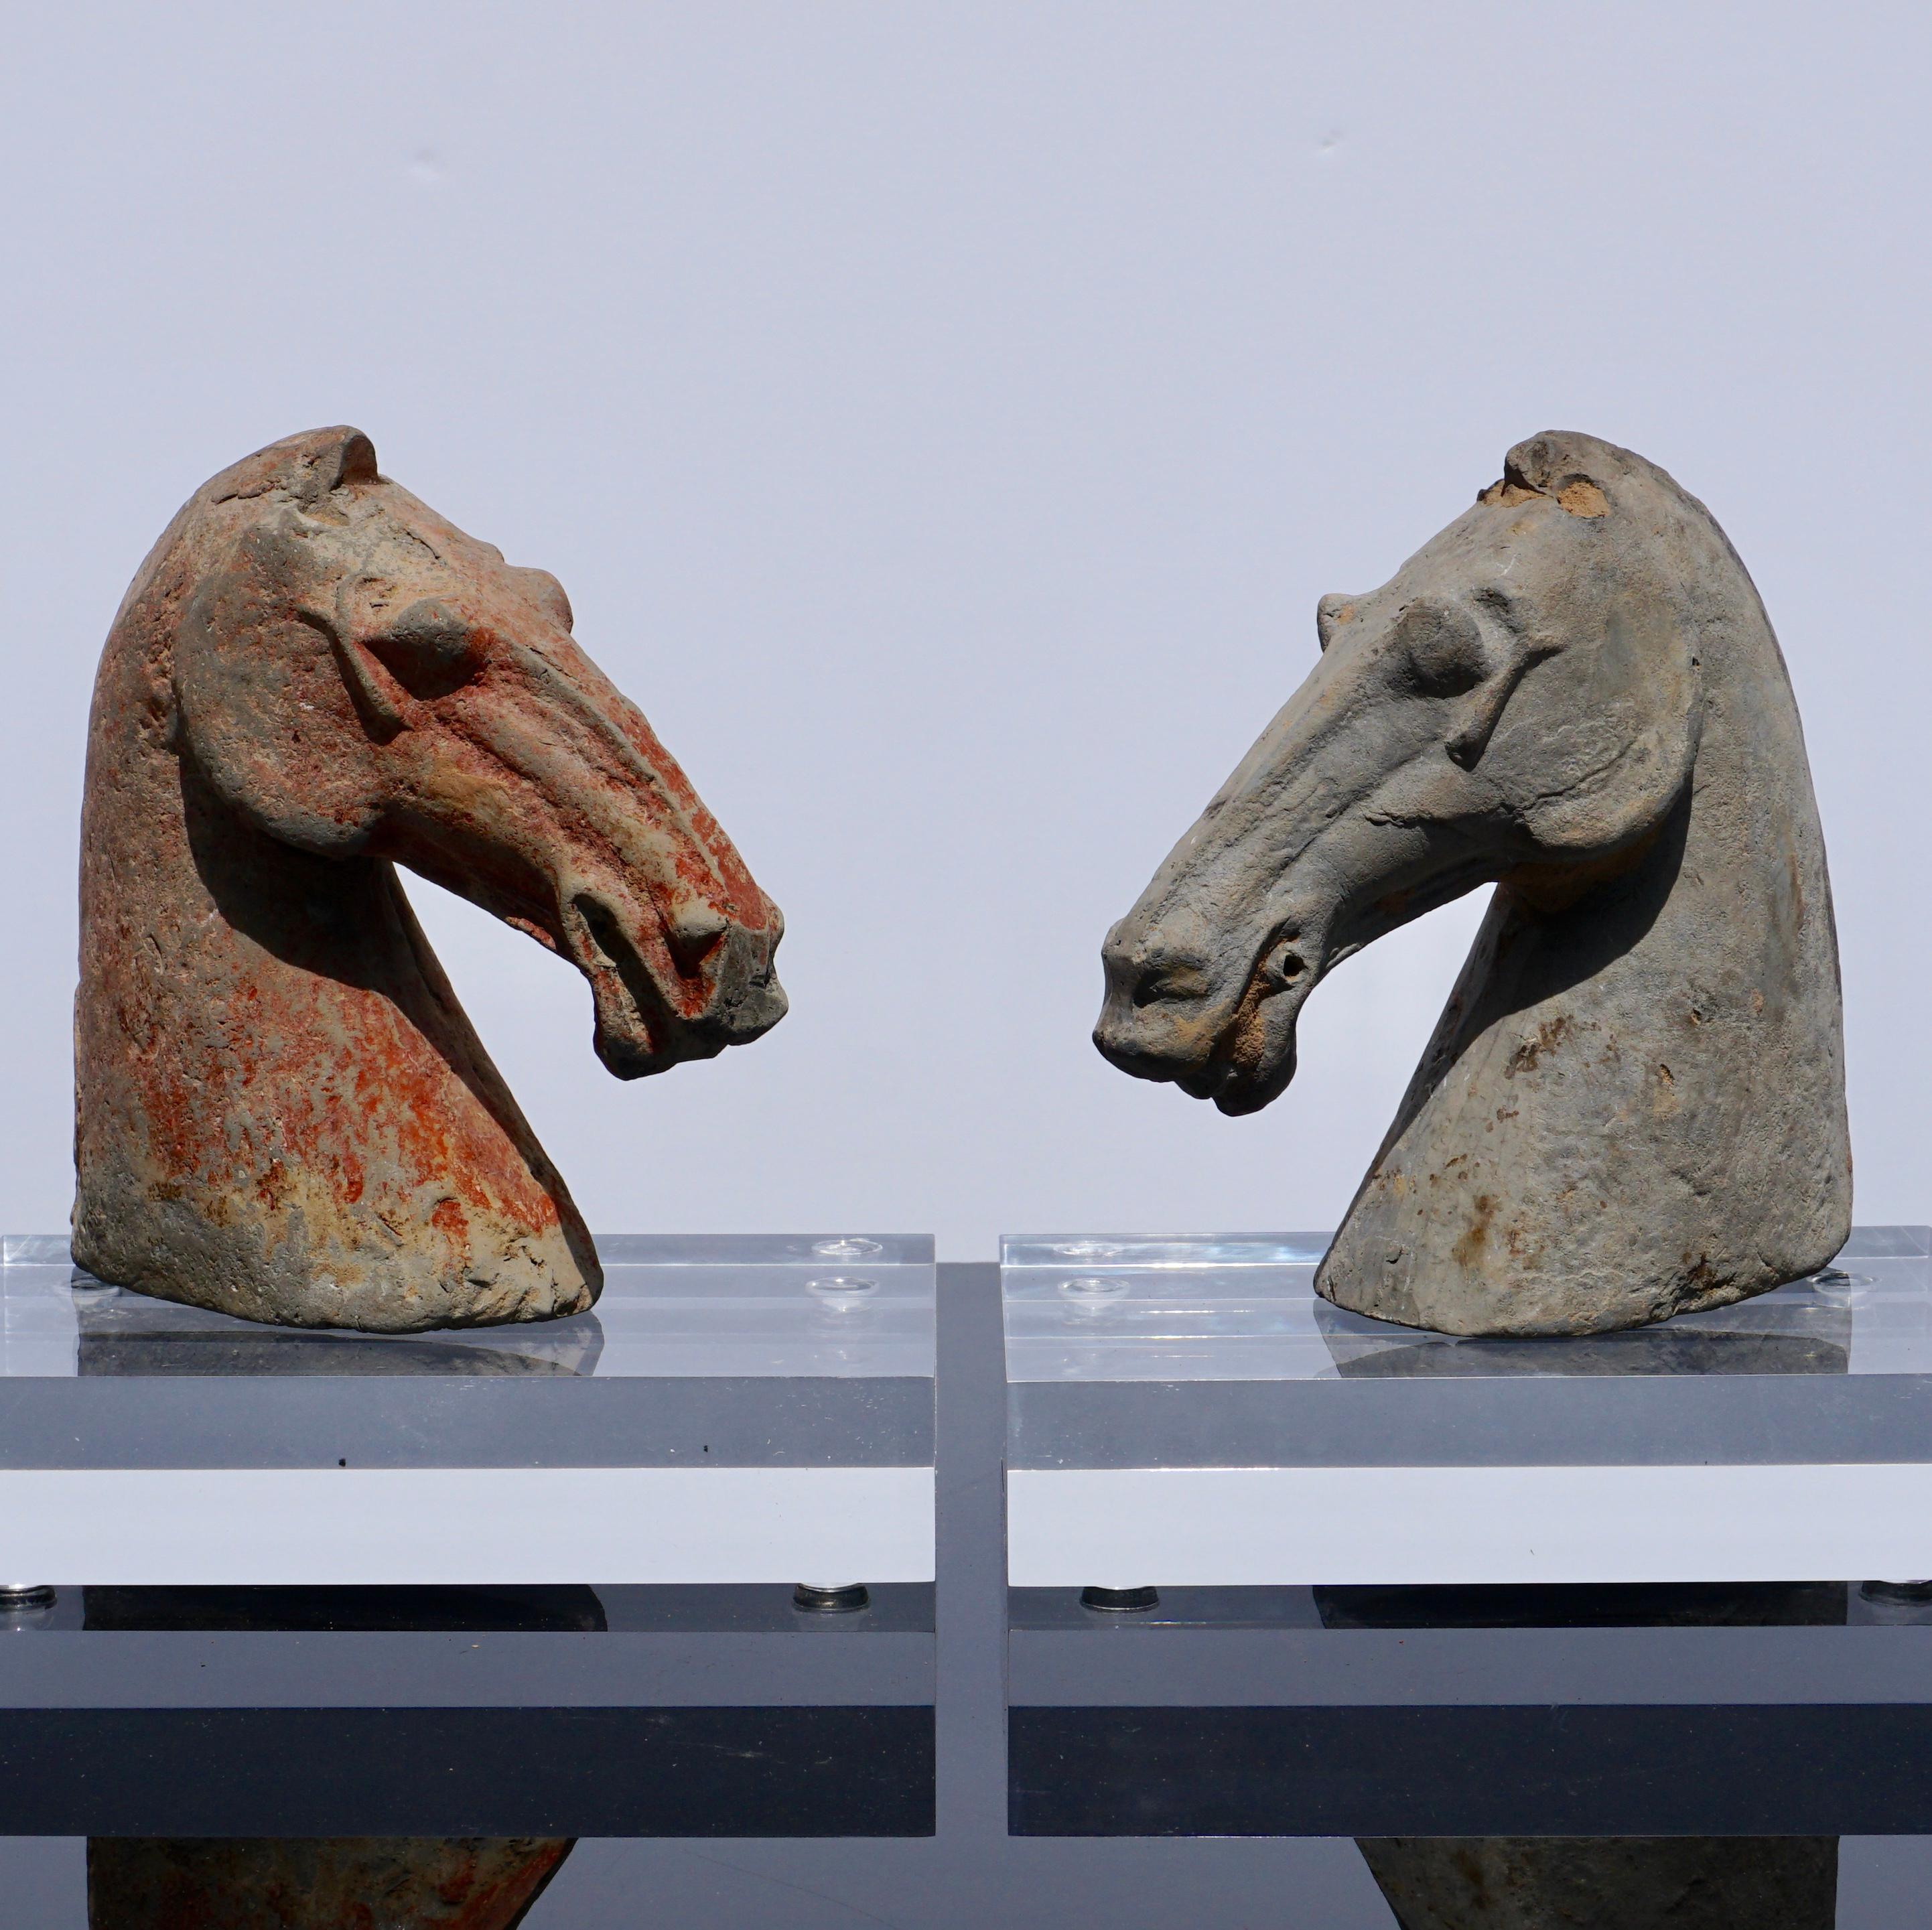 Pair of Chinese Han dynasty horse heads
Han dynasty (206 BC-220 AD) earthenware gray pottery
Each approx.: 6.25 inches high. 6.5 inches wide. 2.5 inches depth
Accompanied by museum quality black base and clear plexiglass display stands. Not